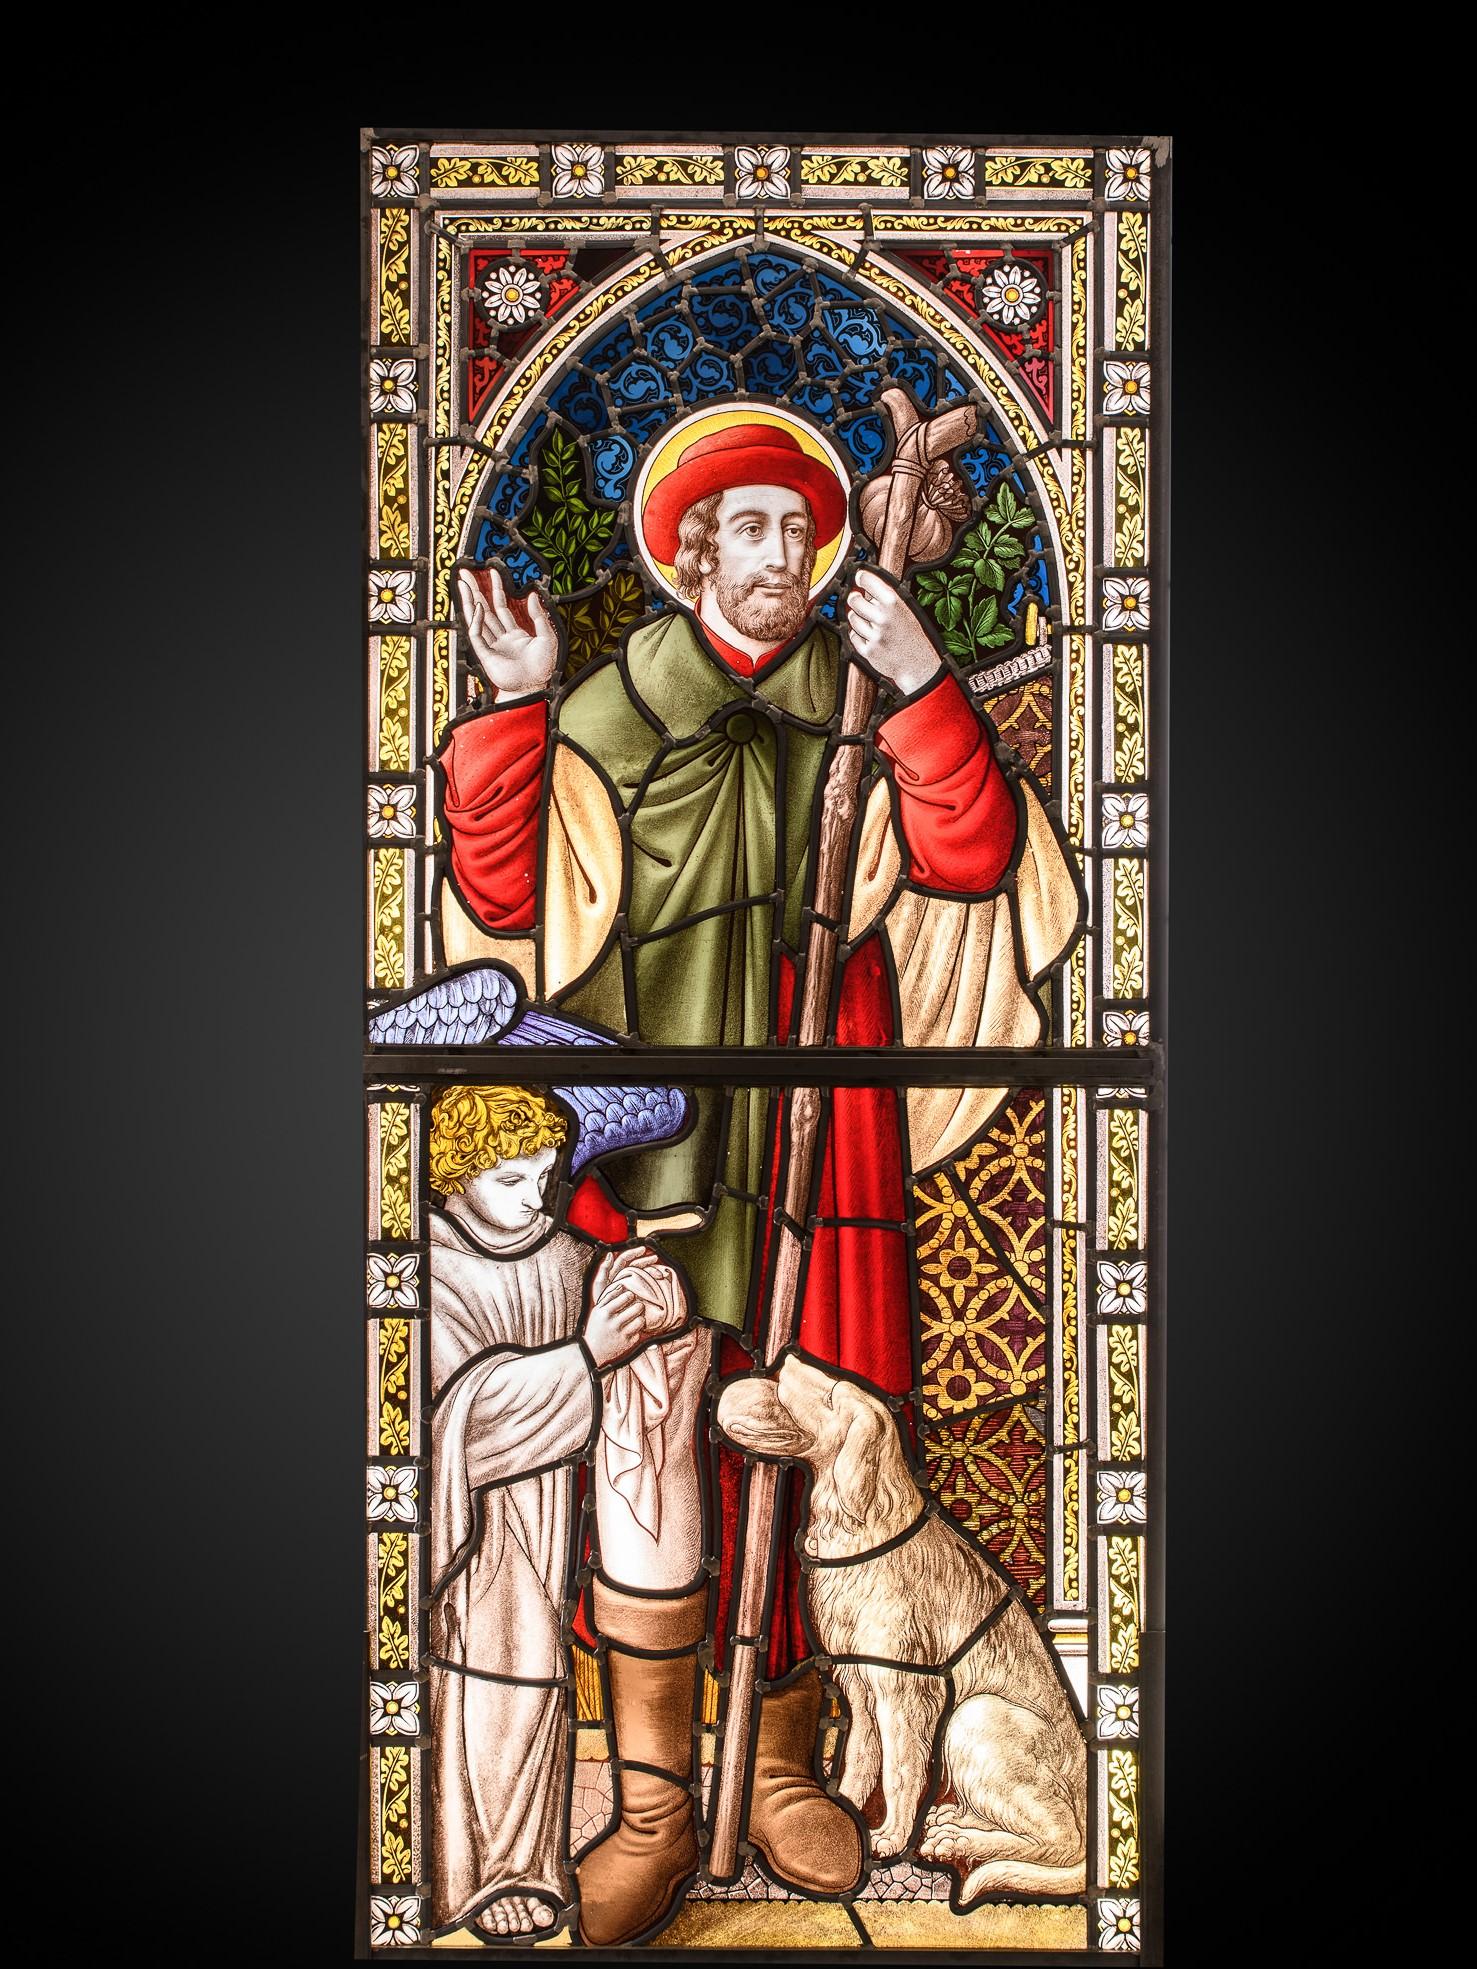 Unknown Figurative Painting - Neo-Gothic Stained Glass Window with St. Roch, Belgium